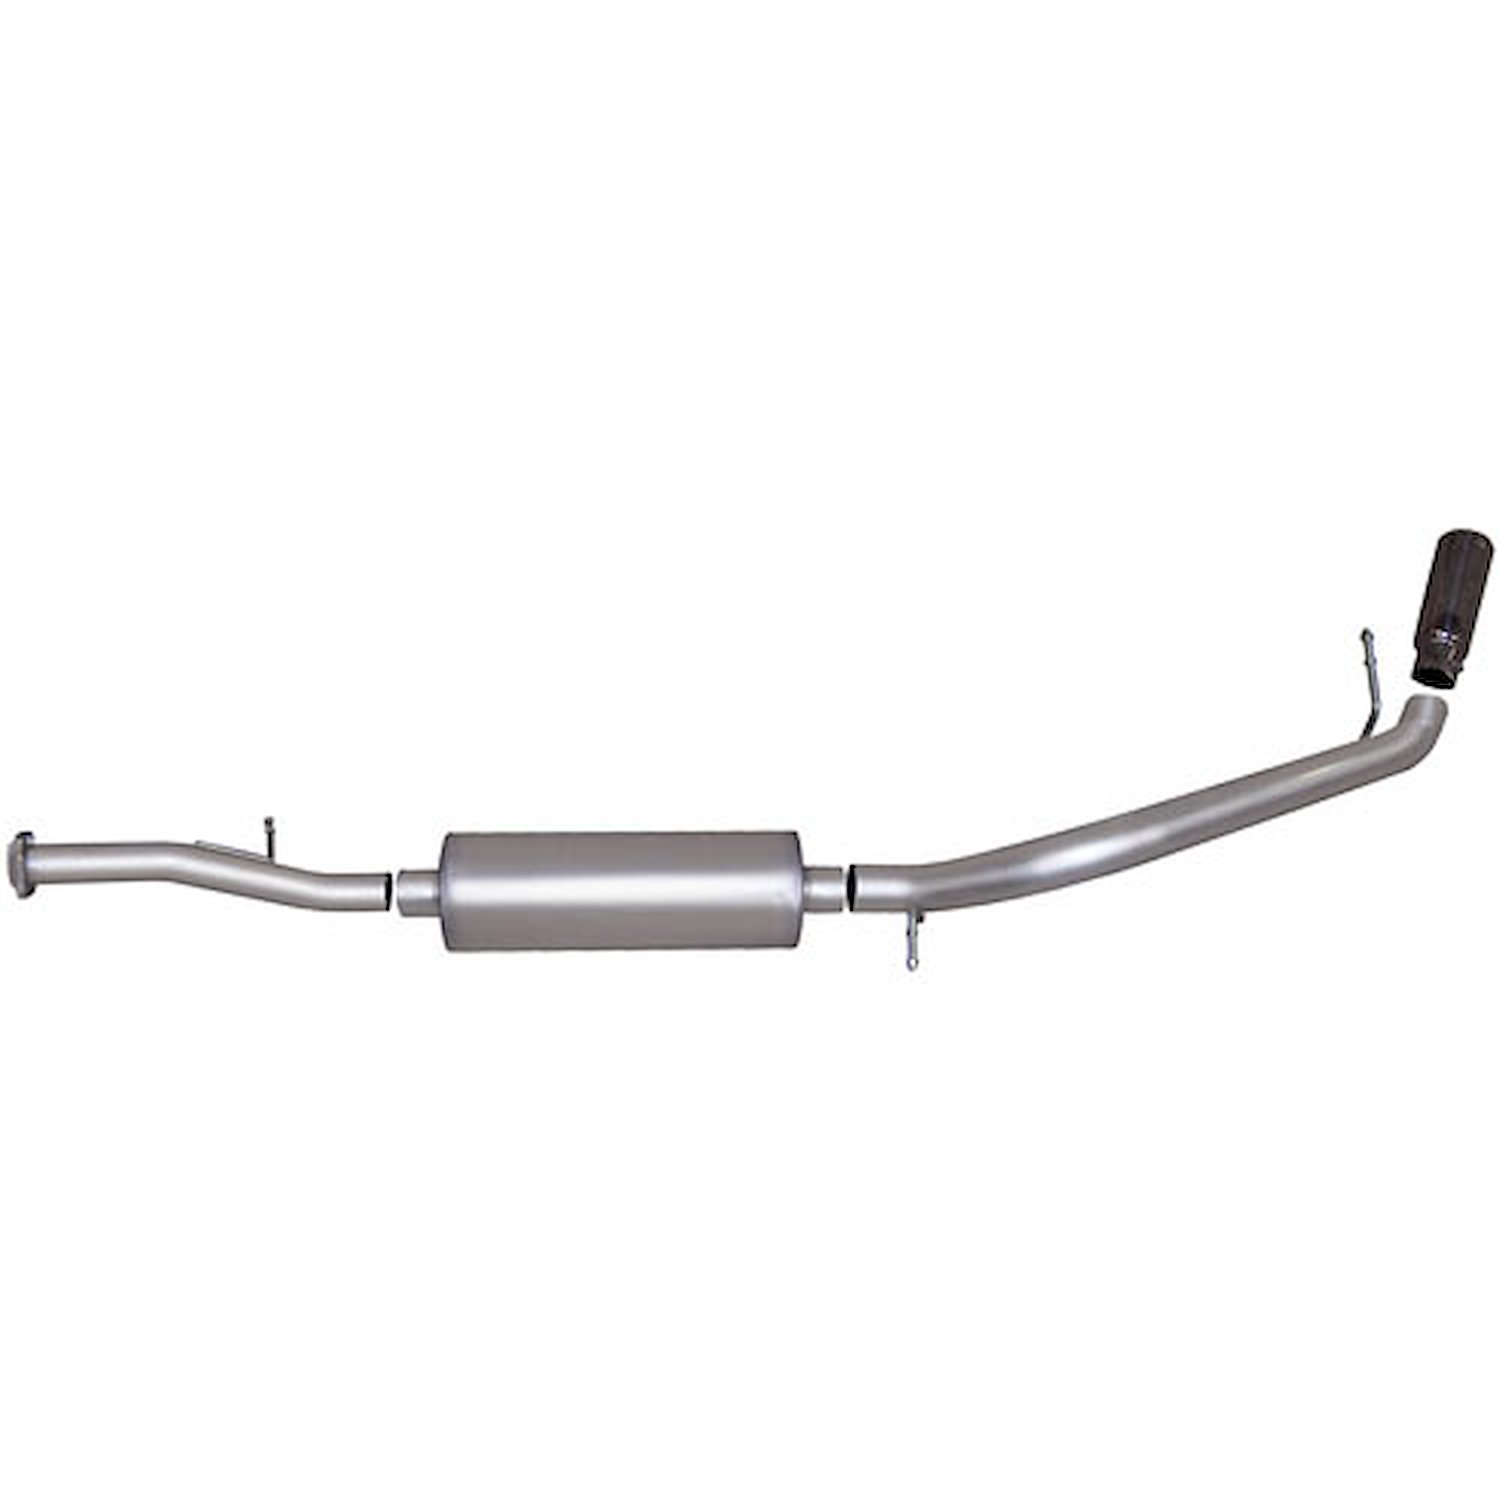 Swept-Side Aluminized Steel Cat-Back Exhaust 2007-14 Chevy